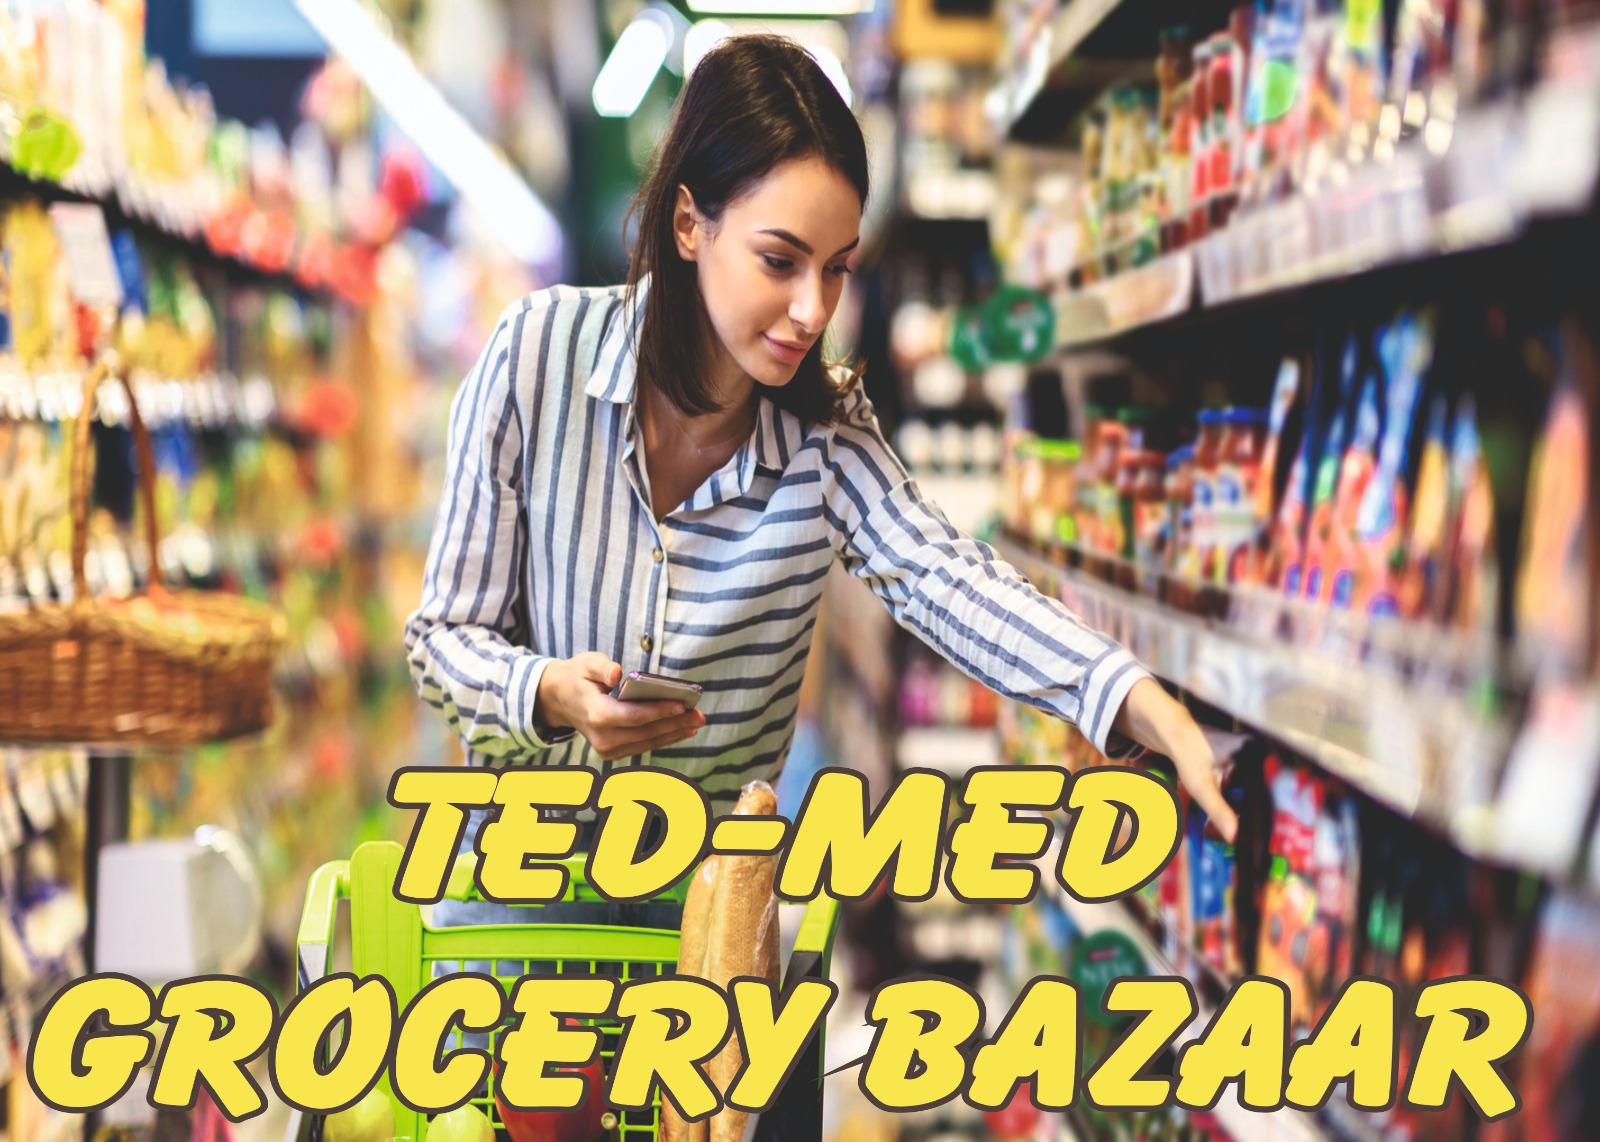 TED-MED GROCERY BAZZAR|Supermarket|Shopping